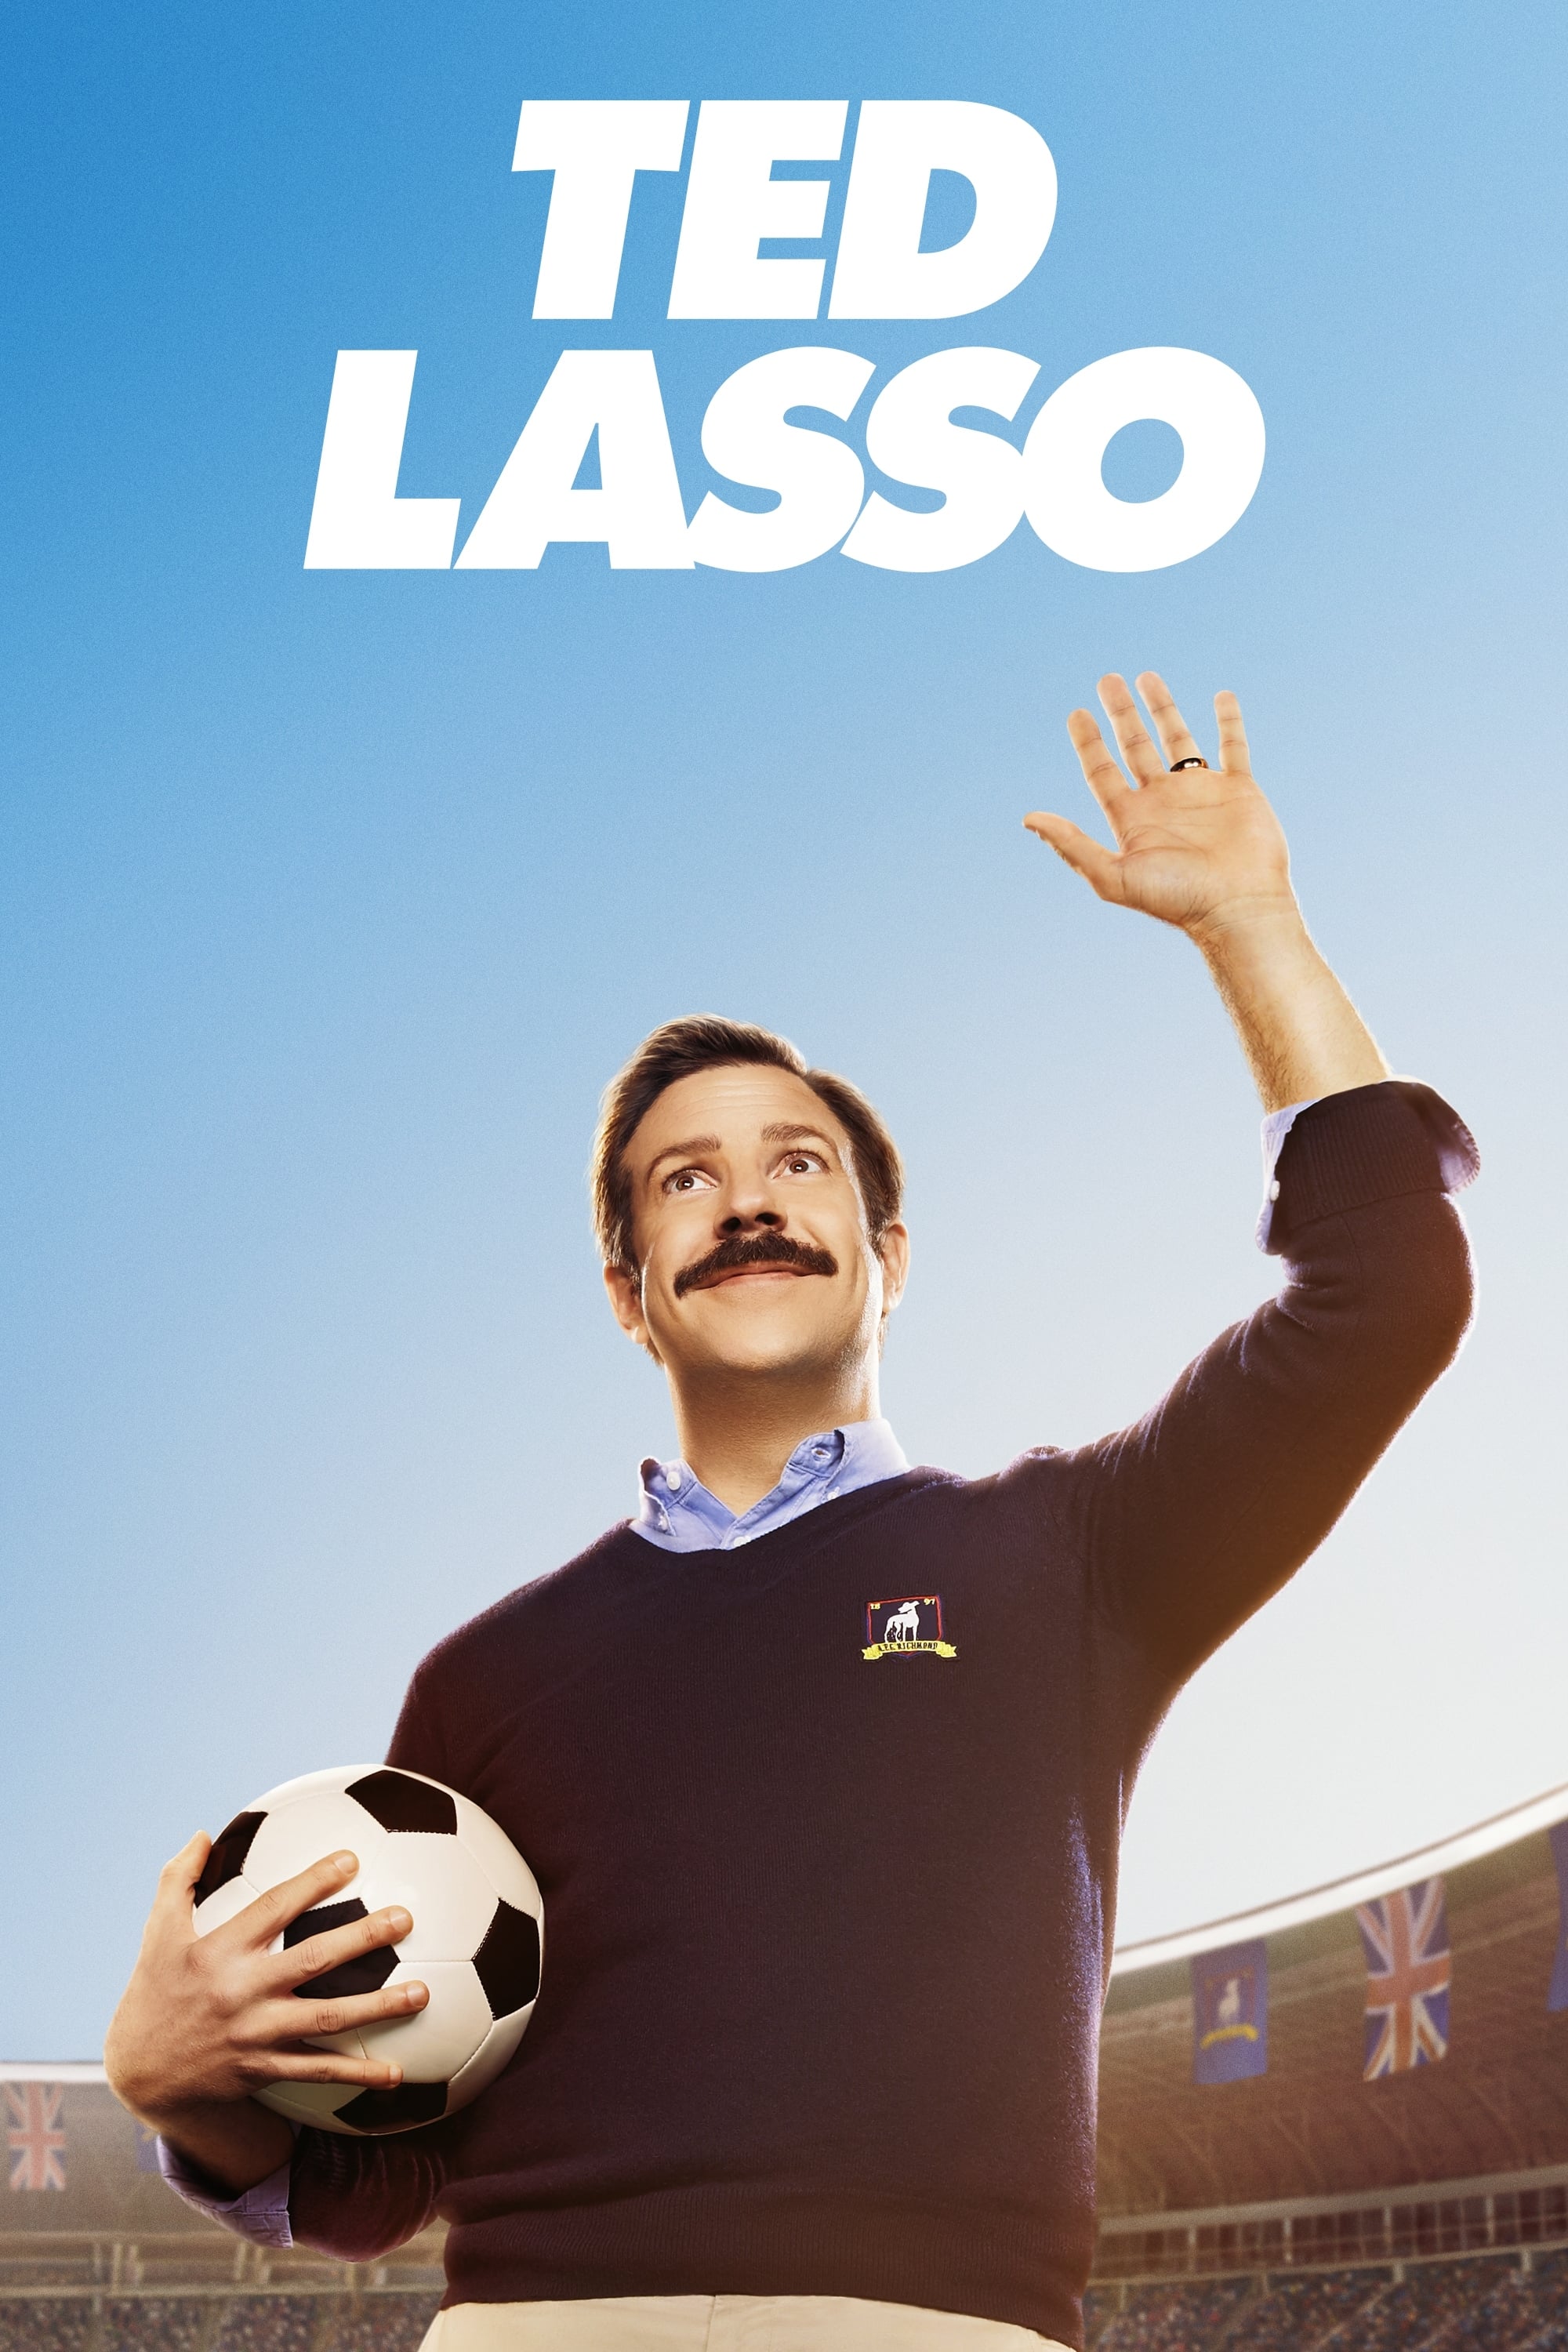 Ted Lasso rating